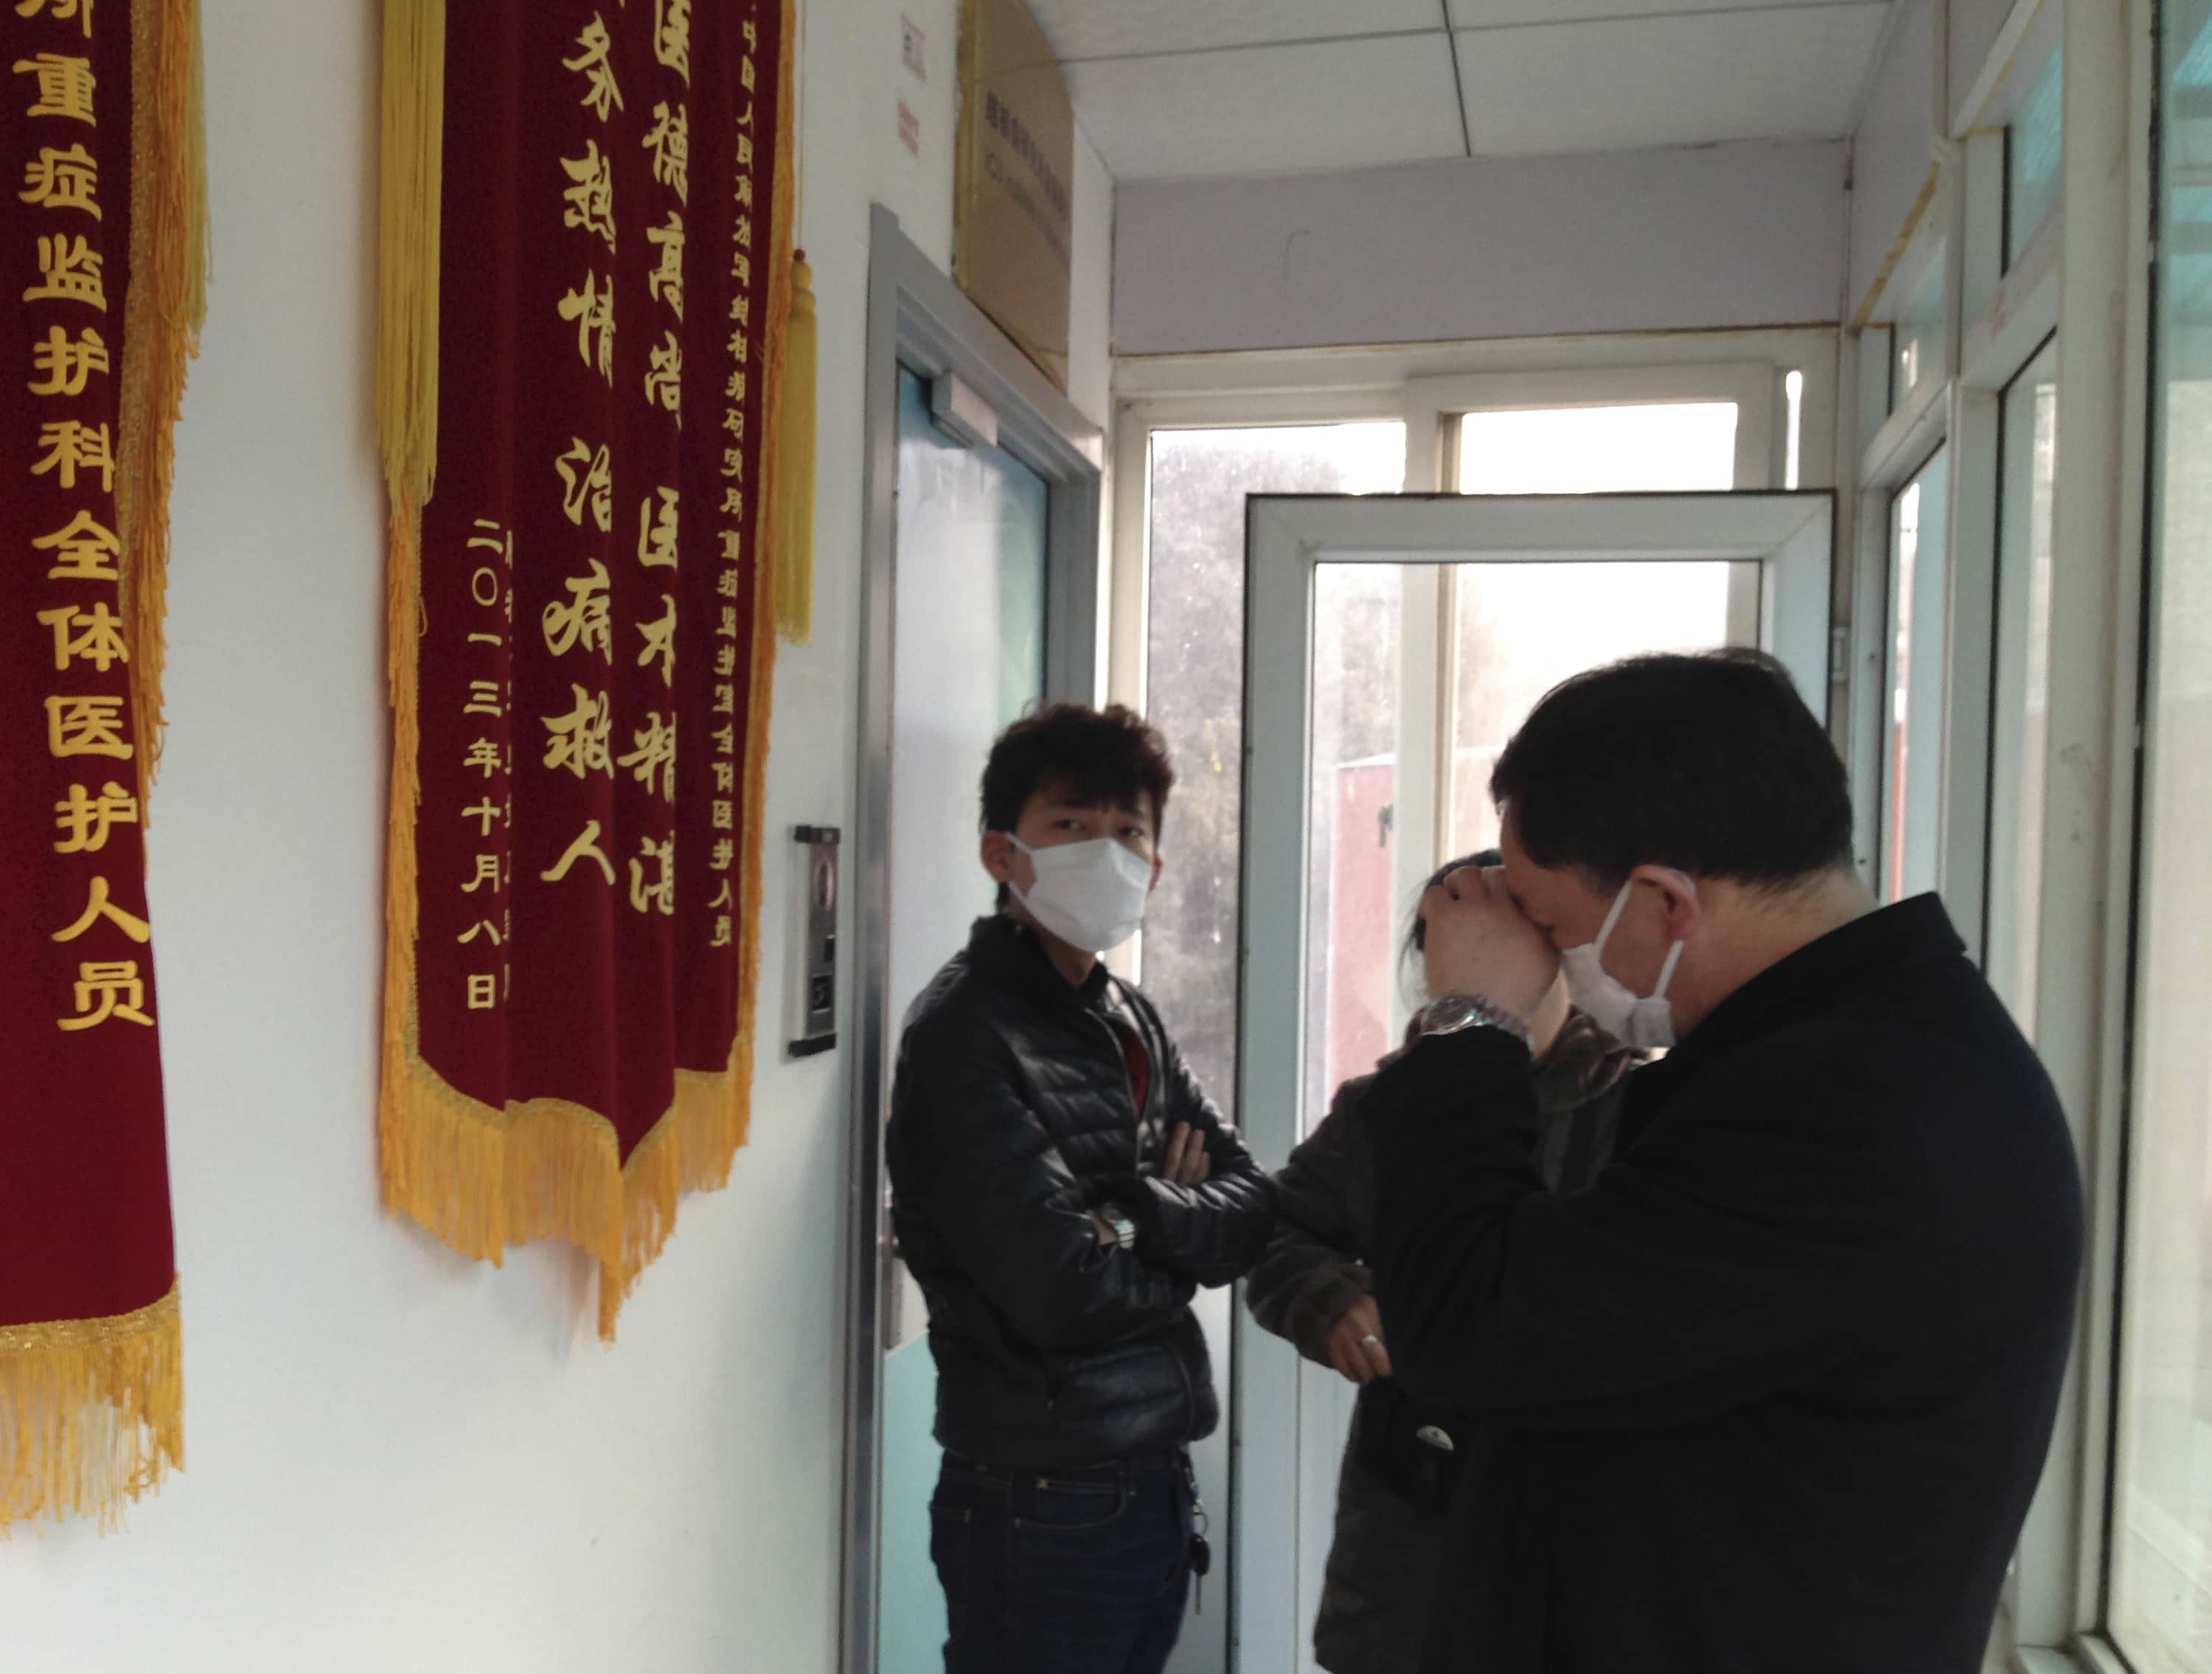 On 1 March 2014, friends of Cao Shunli stood in front of an intensive care unit at a Beijing hospital where the activist was treated as they were not allowed to go inside, REUTERS/Kim Kyung-Hoon